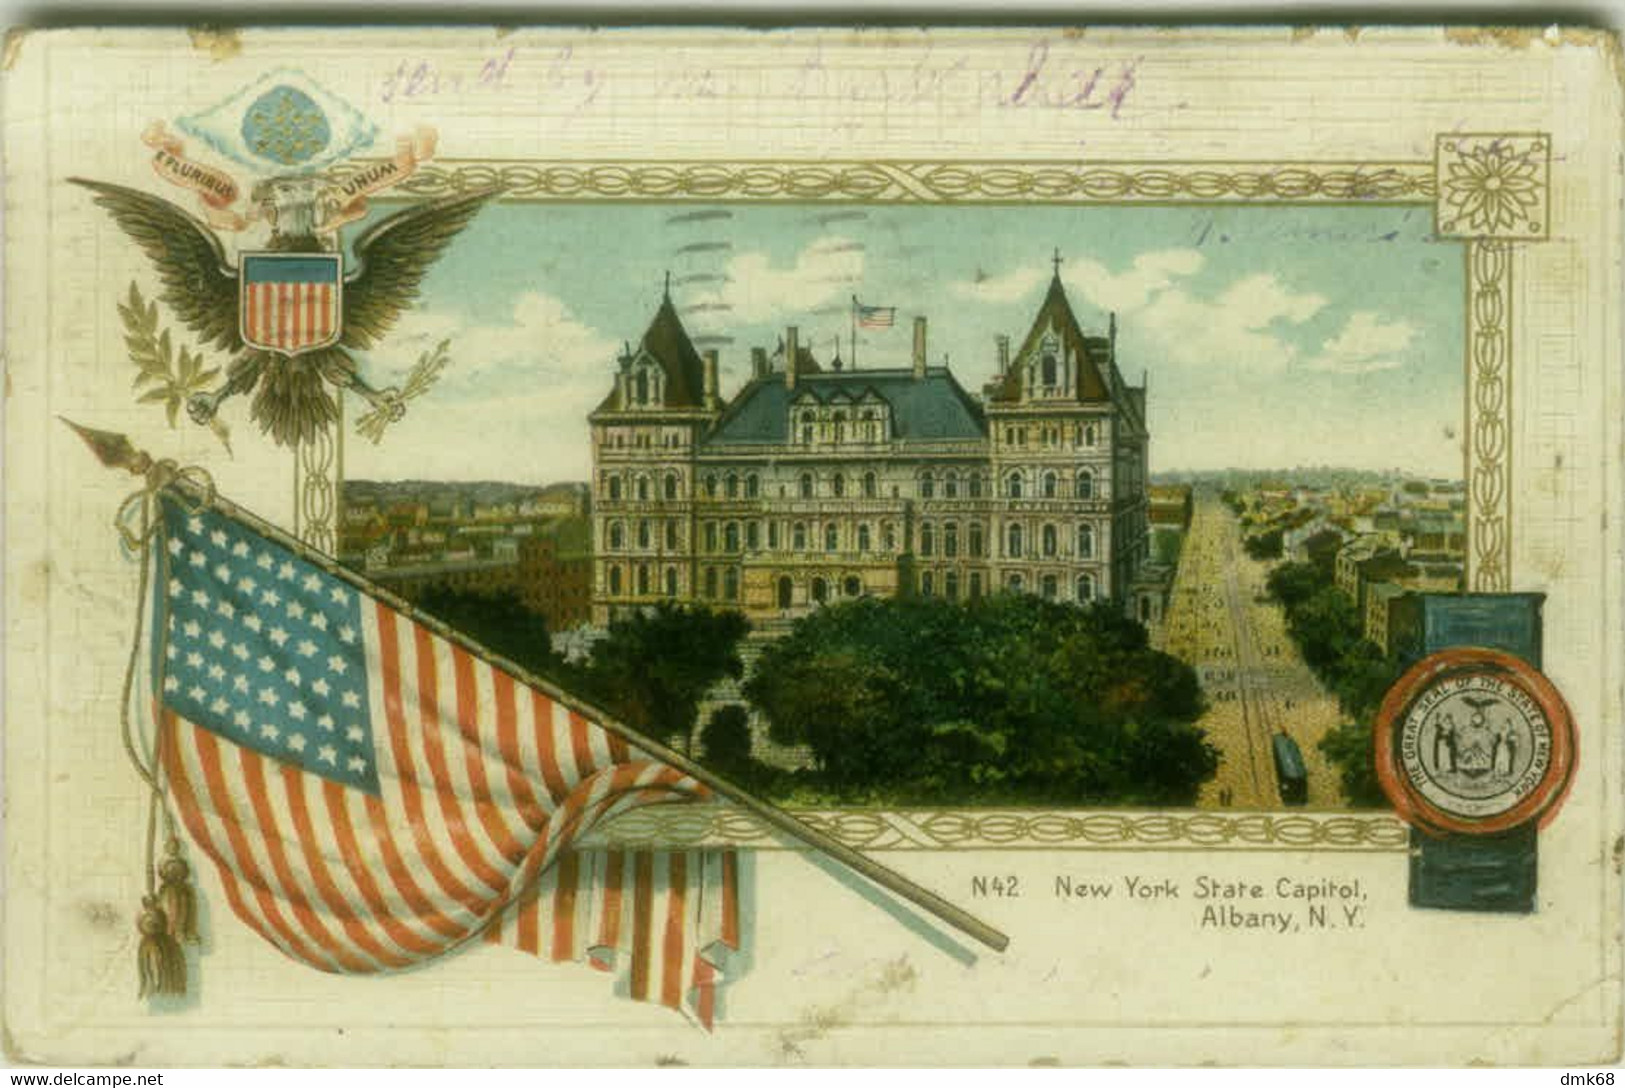 NEW YORK STATE CAPITOL - ALBANY - PUB. BY S. LANGSDORT - EMBOSSSED POSTCARD - MAILED 1907 (11328) - Albany